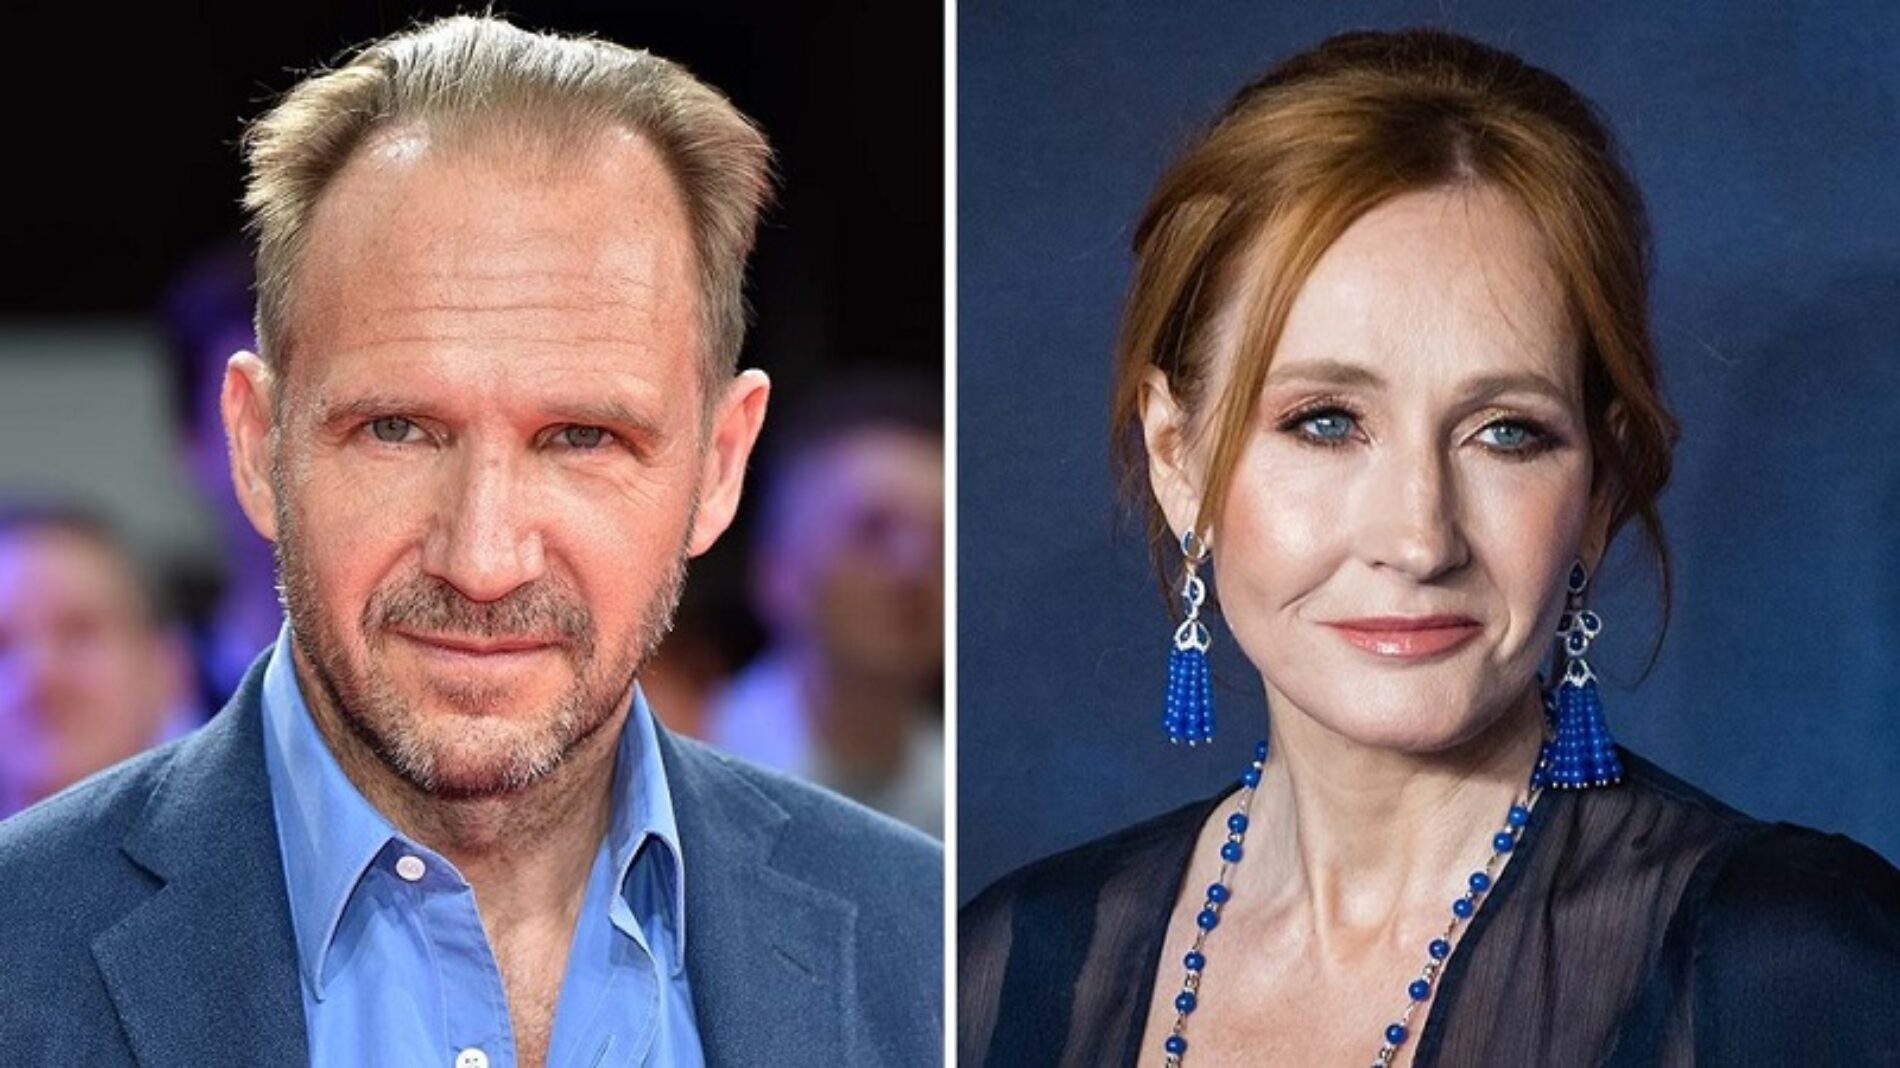 “I Can’t Understand The Vitriol Directed At Her.” ‘Harry Potter’ Actor Ralph Fiennes Defends JK Rowling Following Trans Controversy